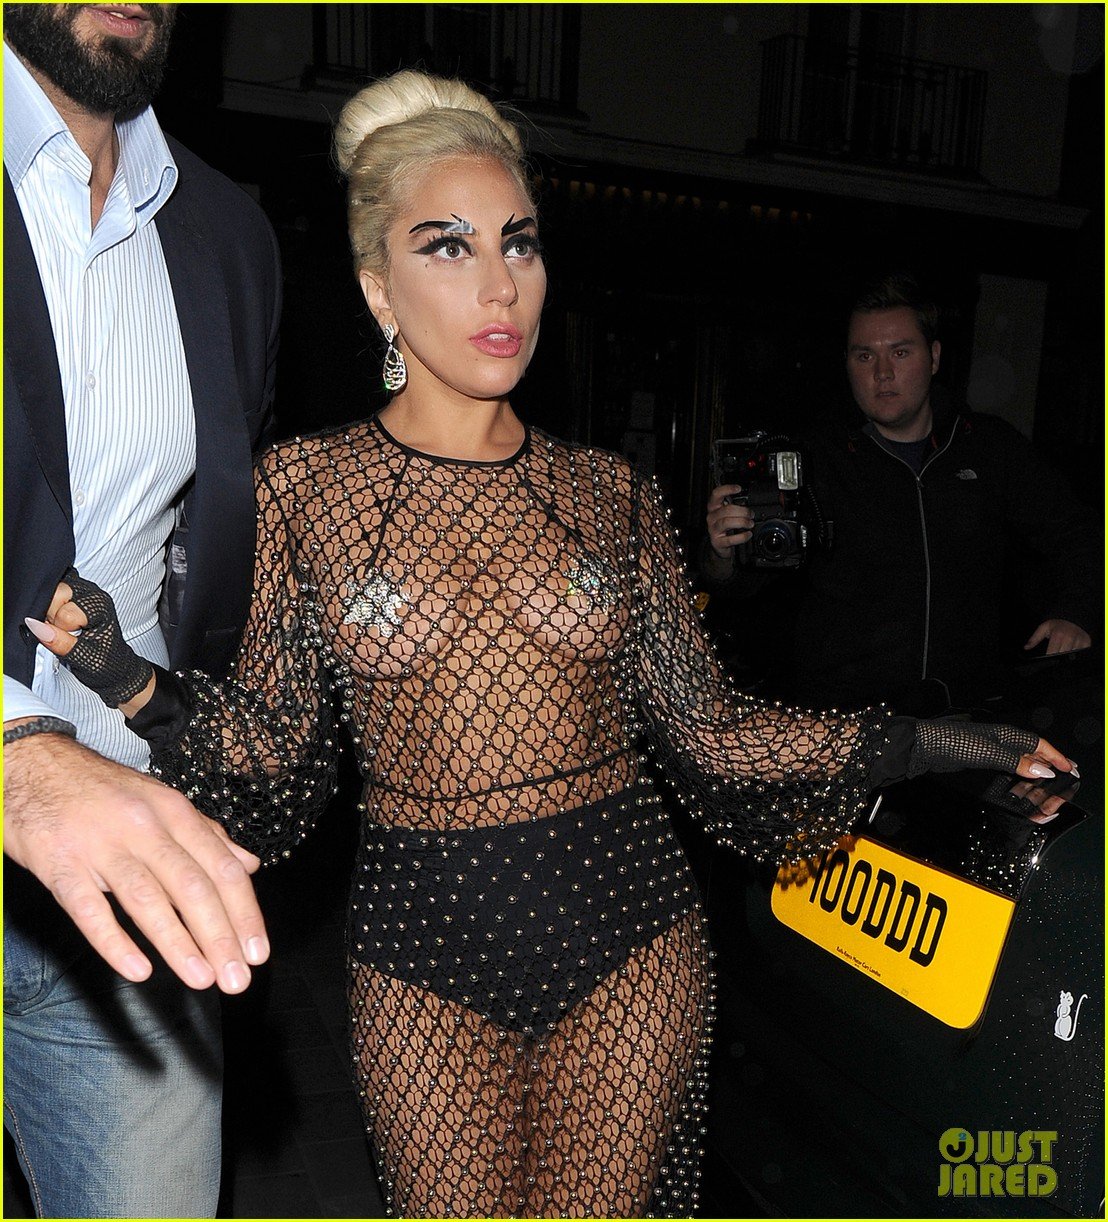 Lady Gaga Shows Off Boobs & Underwear in Barely There Fishnet Outfit. l...